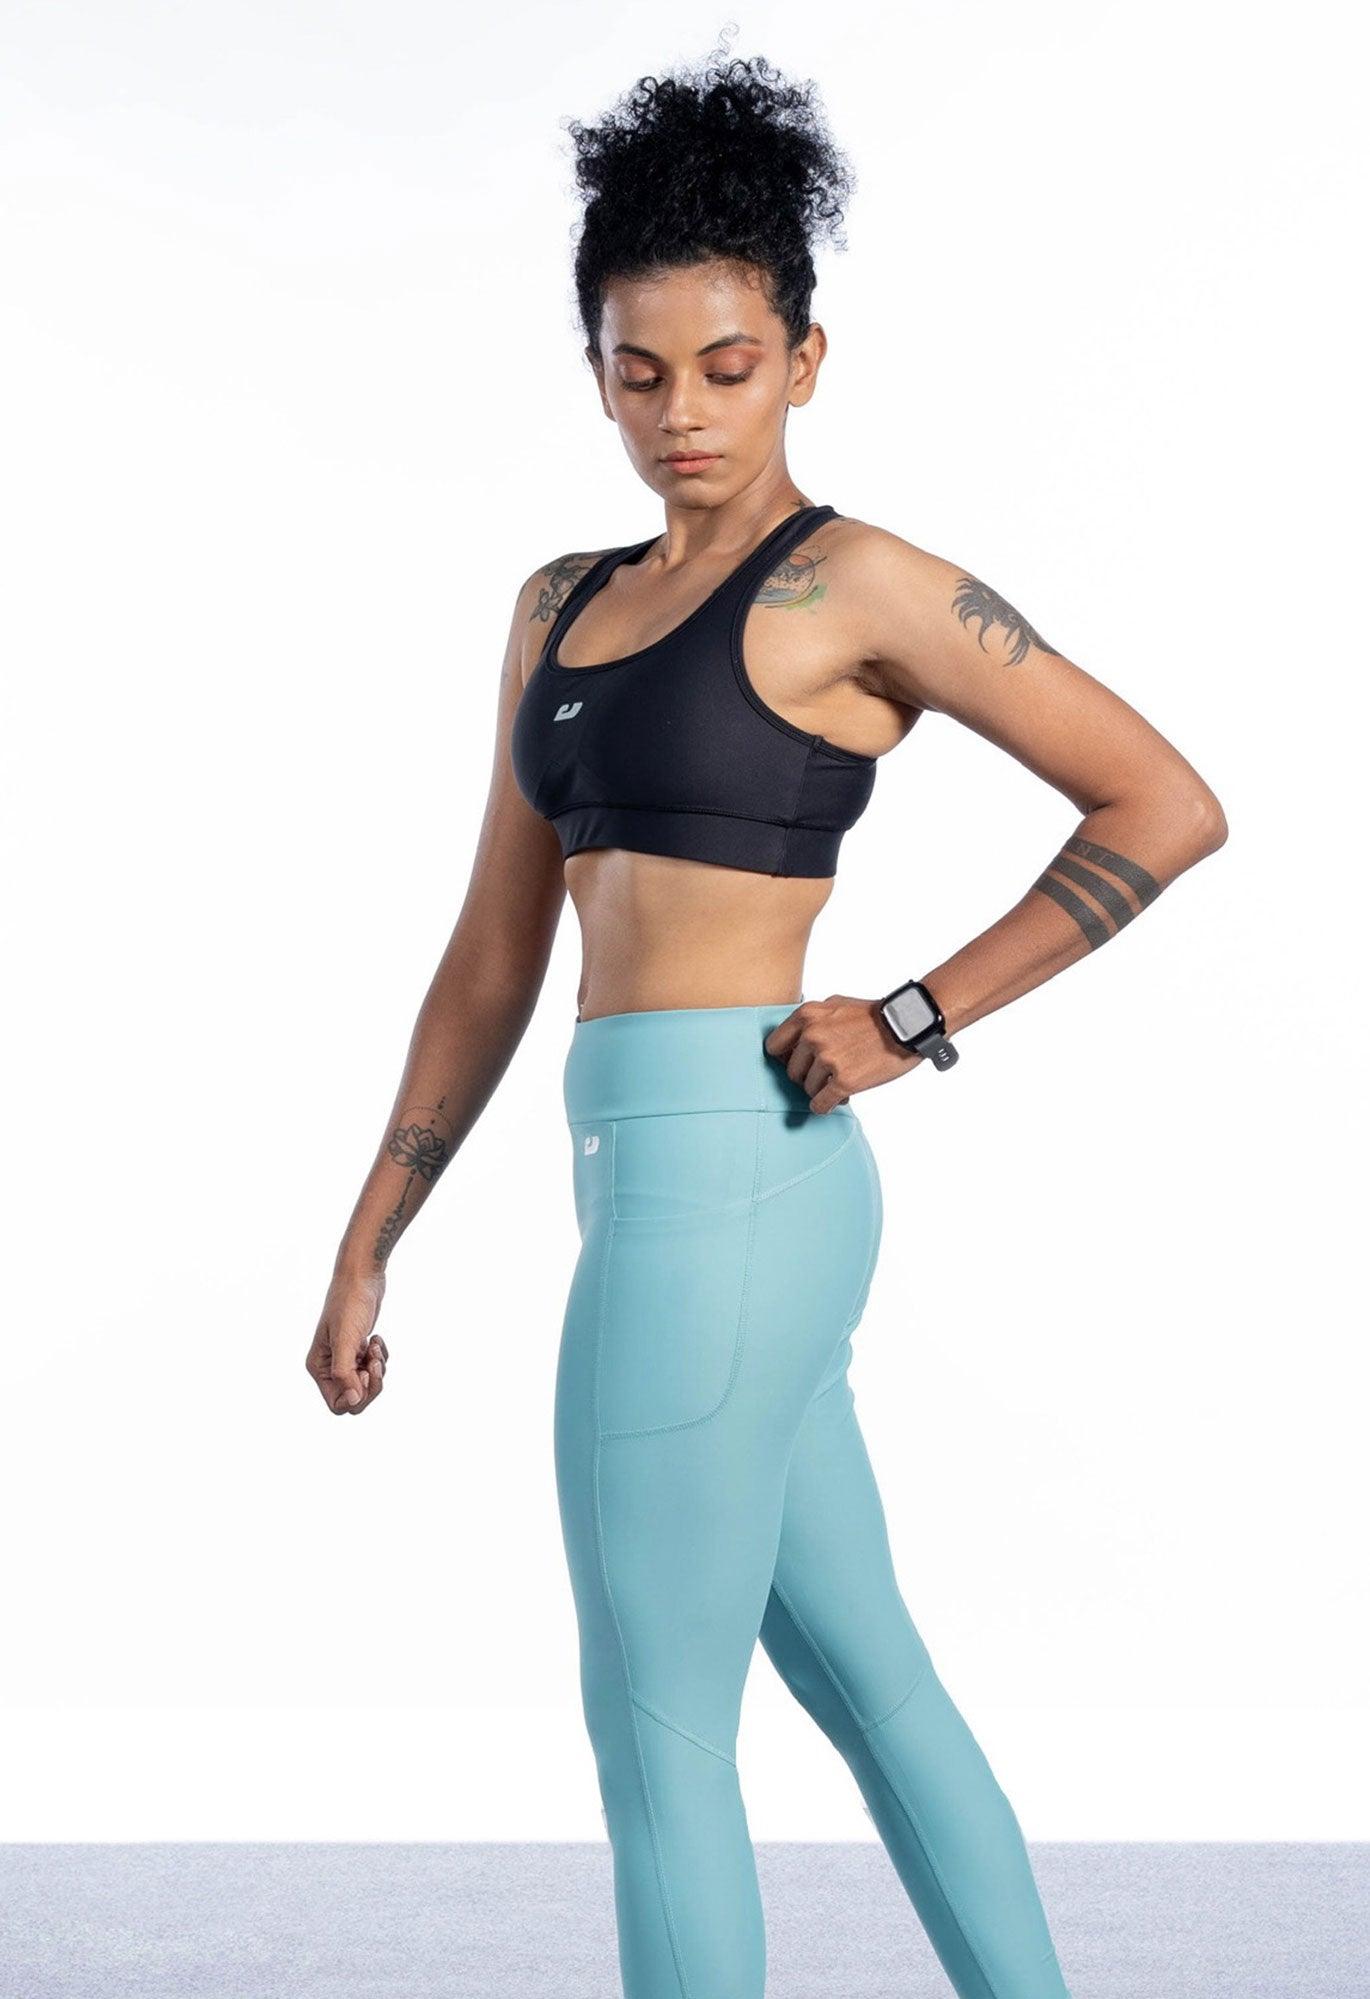 SPORTS BRA - Healthy and Comfortable Lifestyle